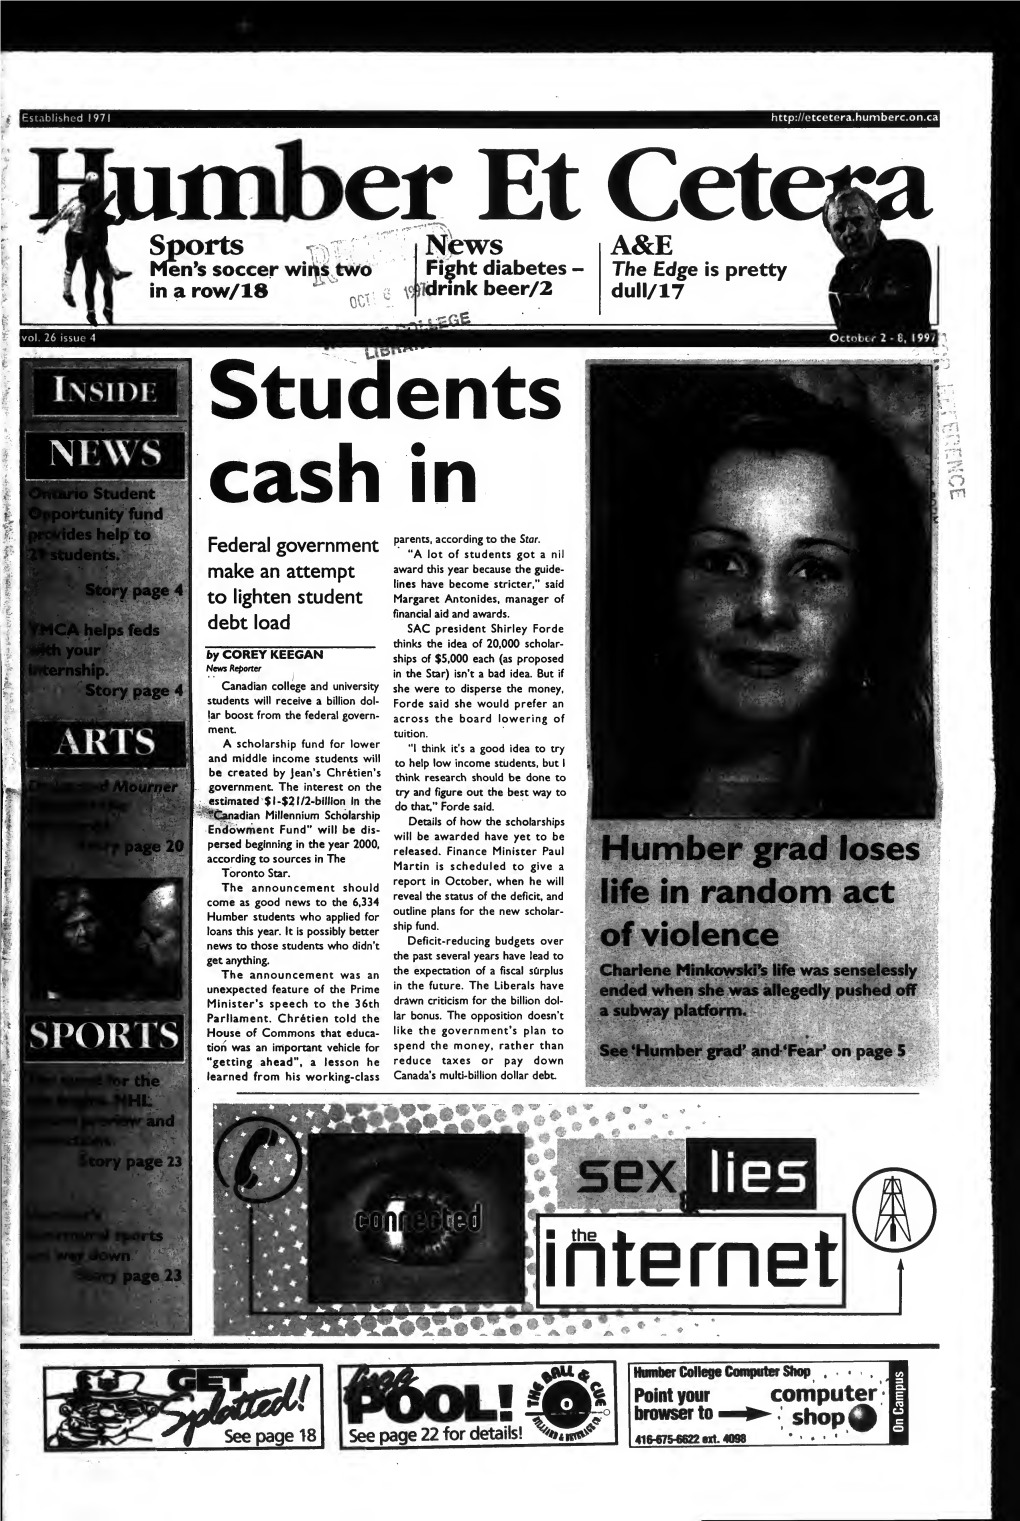 Students K' NEWS Dritau'to Student Cash in Qkpportunity Fimd Htovides Help to Federal Government Parents, According to the Star